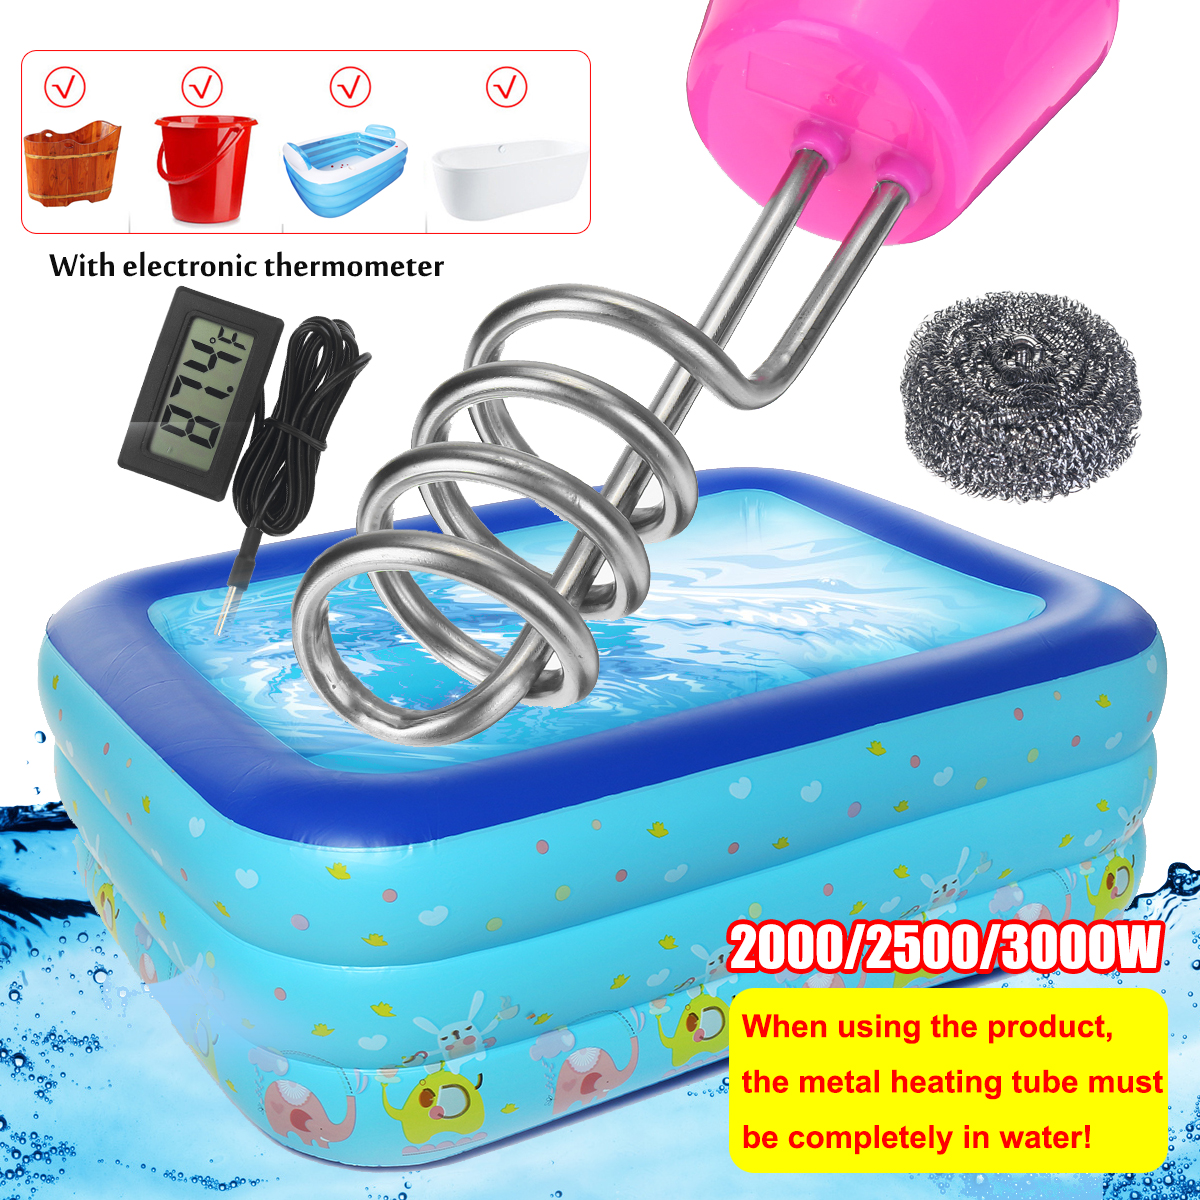 New-3000W-2000W-Bathtub-Pool-Suspension-Float-Water-Heater-With-Thermometer-1711425-2